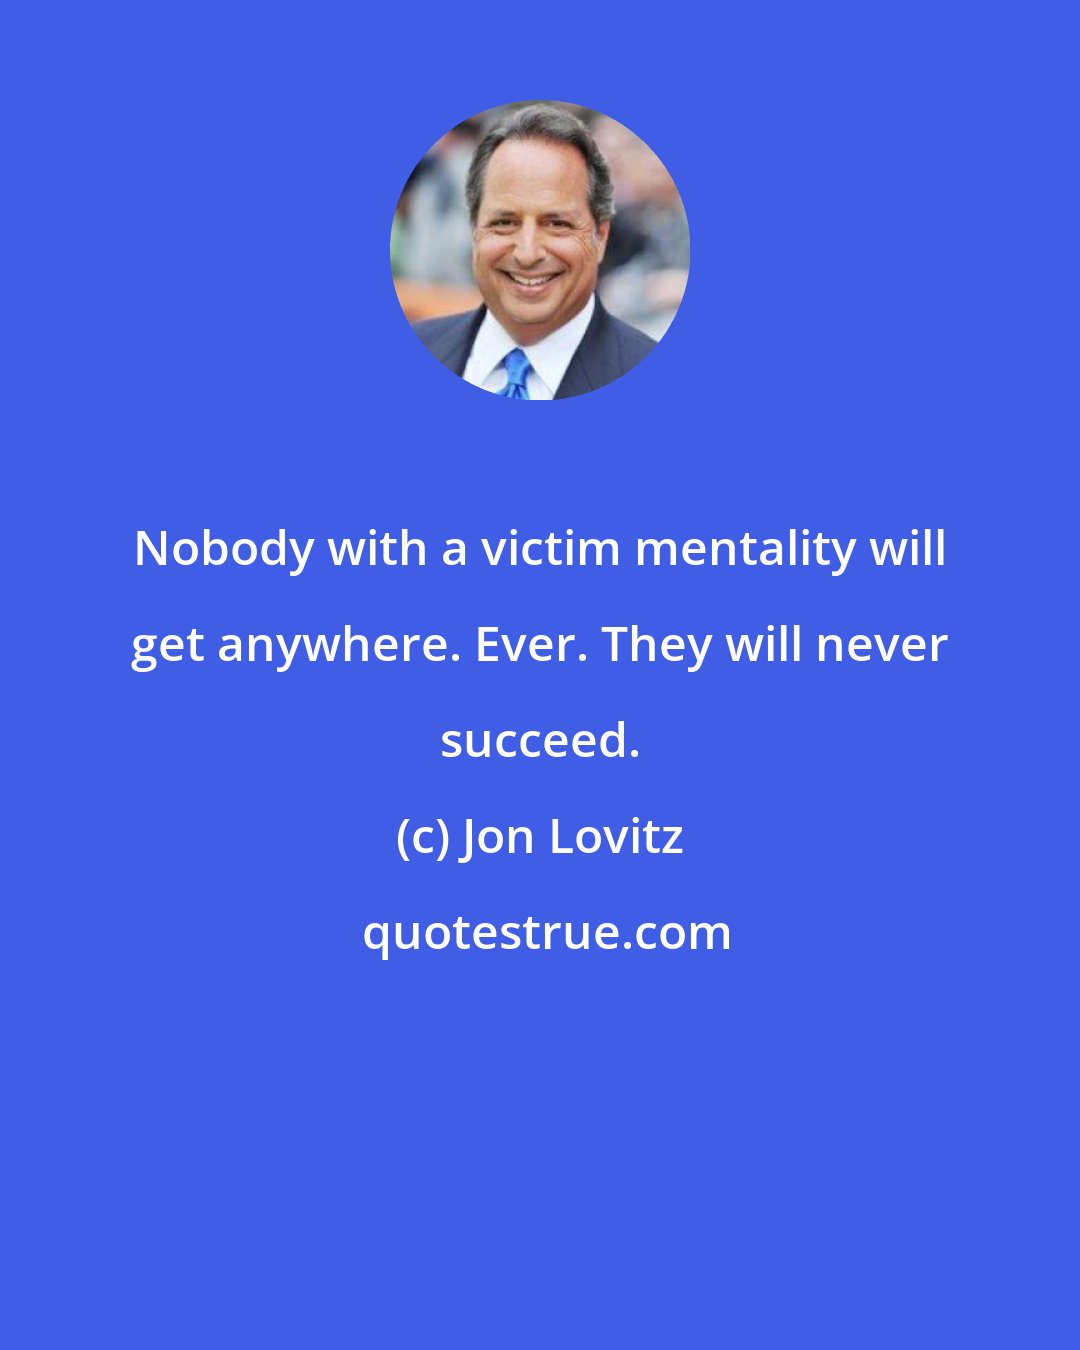 Jon Lovitz: Nobody with a victim mentality will get anywhere. Ever. They will never succeed.